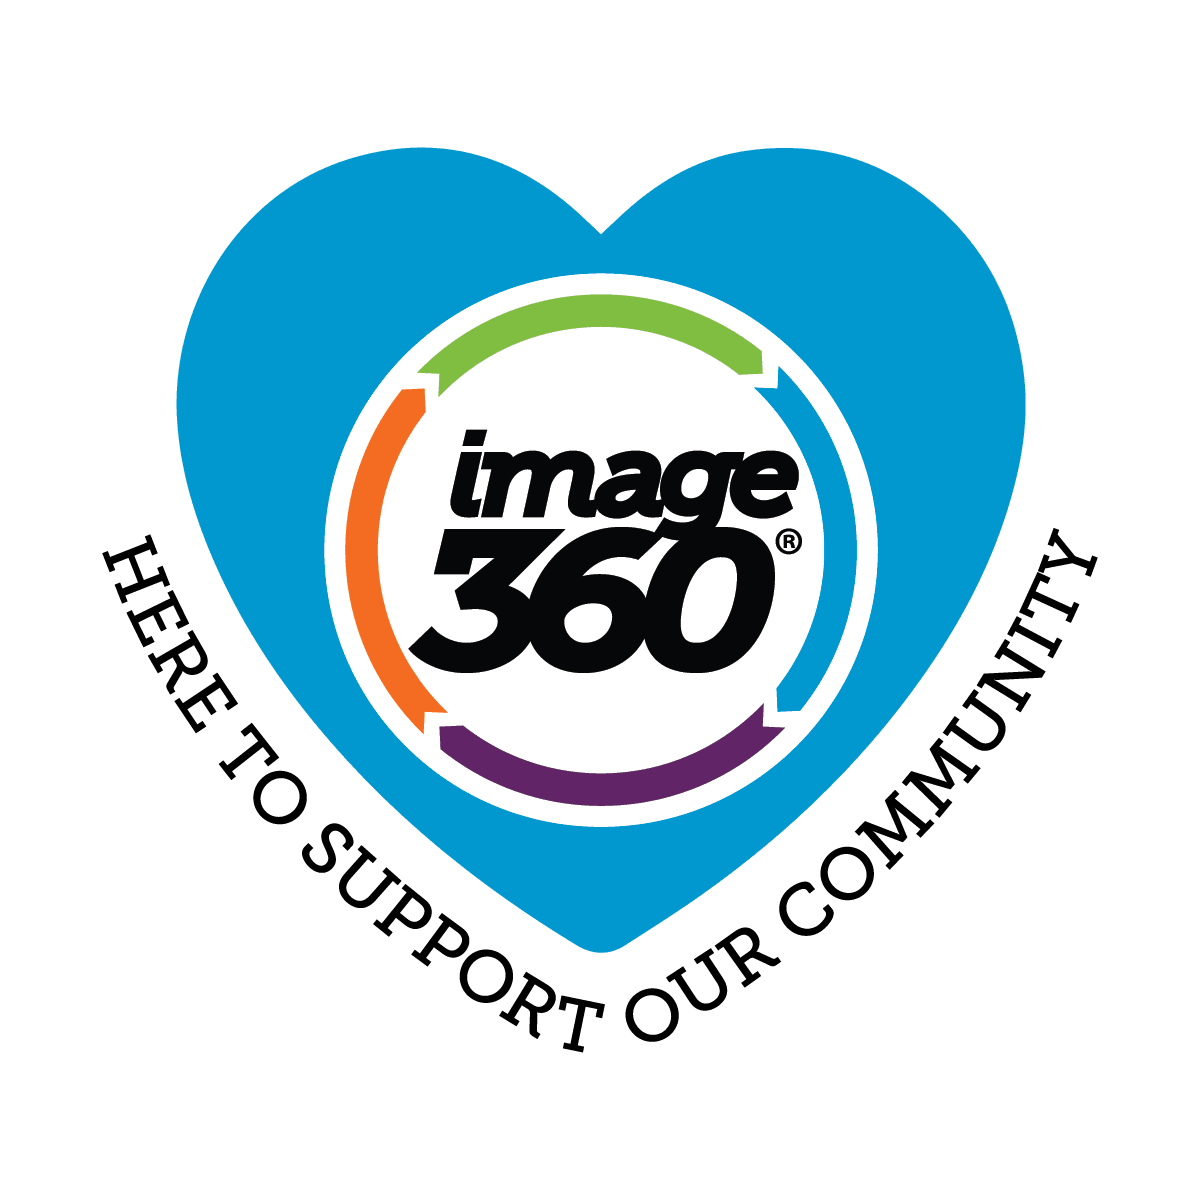 Image360 is Here to Support our Community